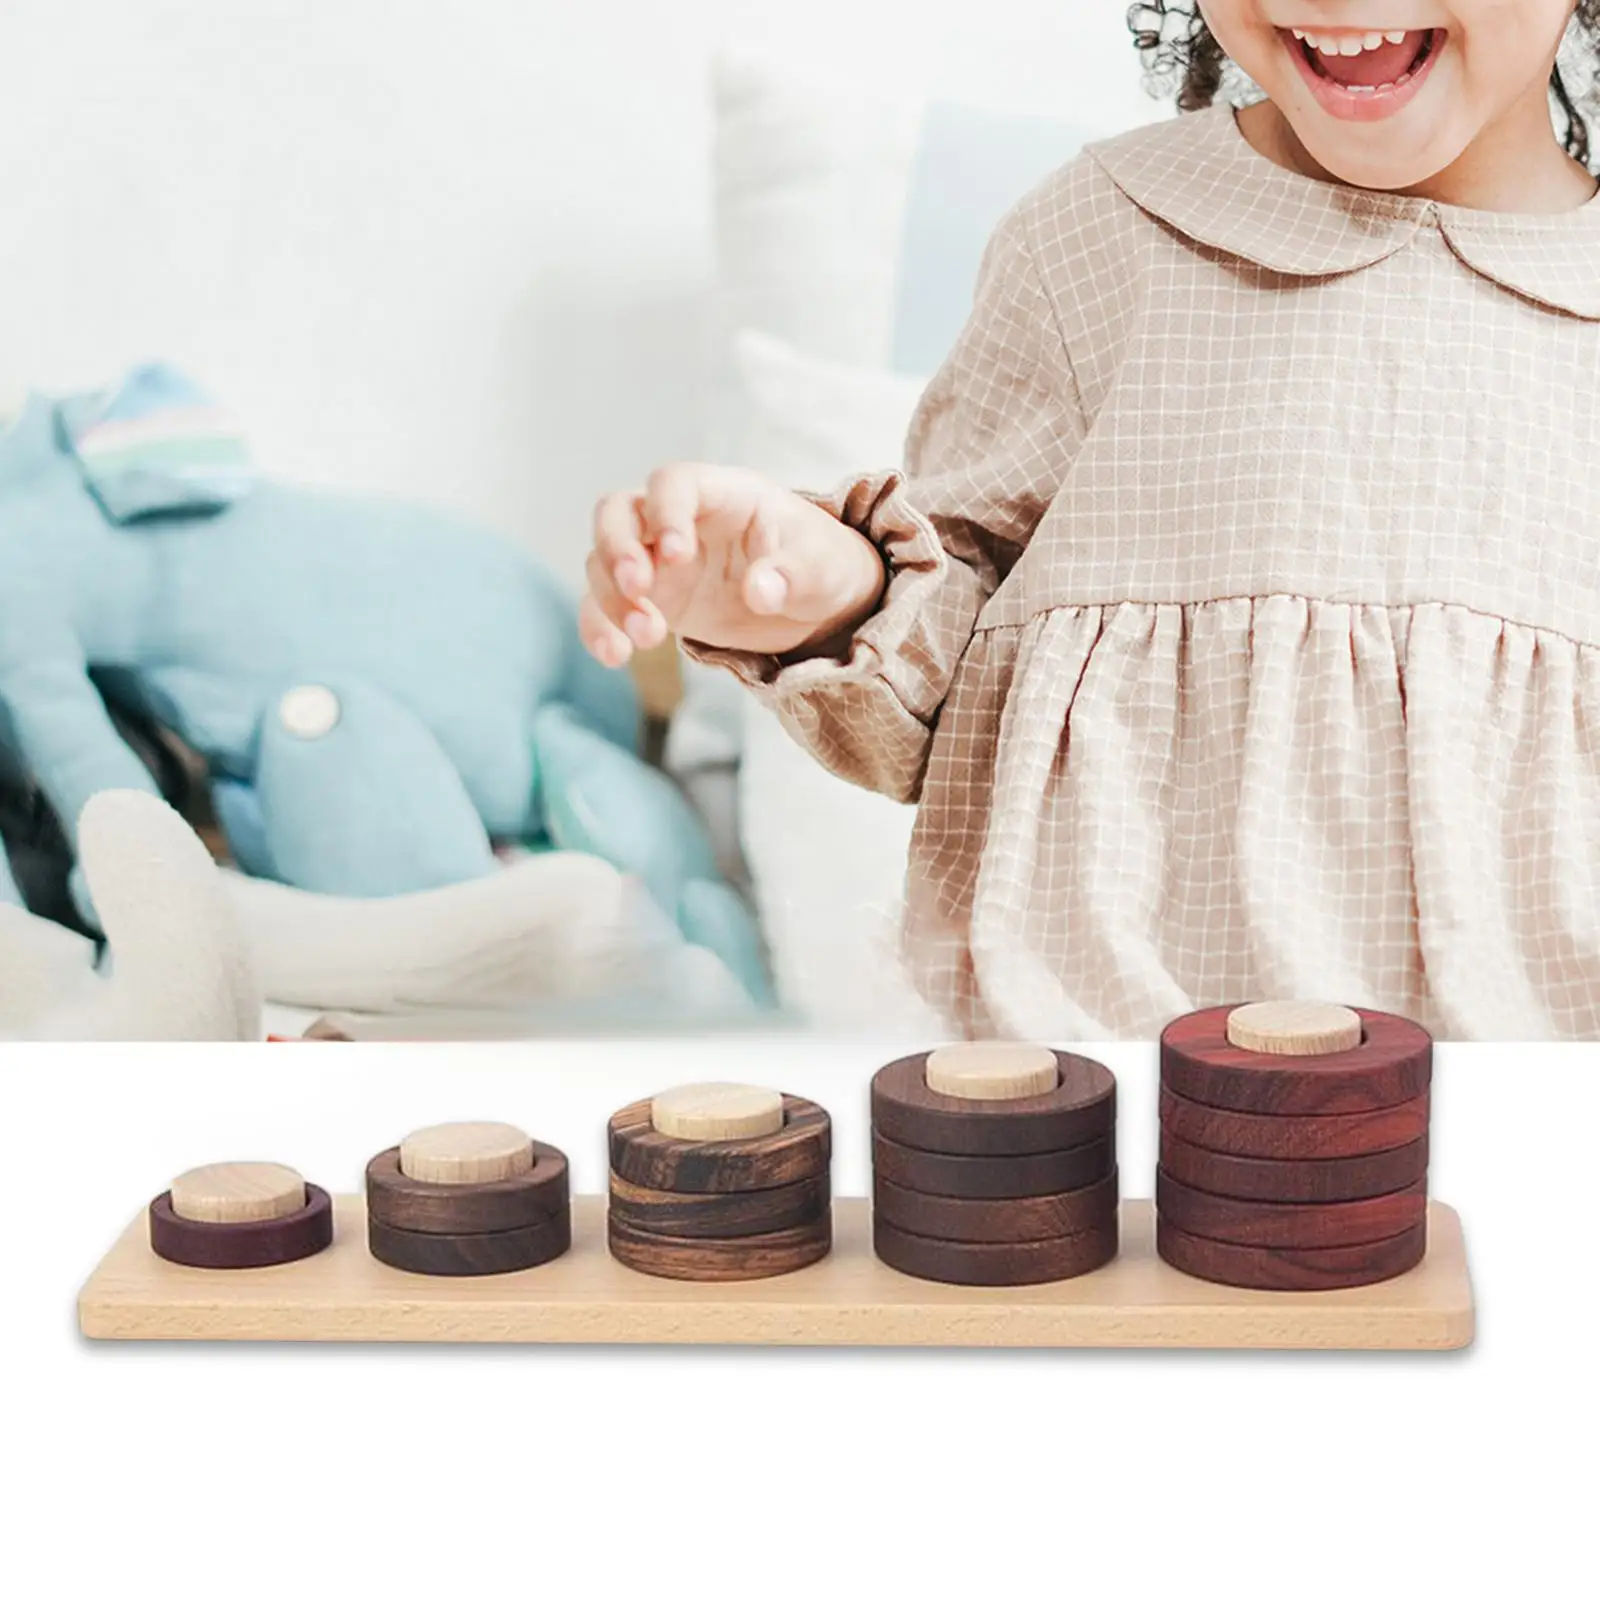 Wooden Stacking Toys Sensory Toys Early Educational Learning Toy Round Blocks for Girls Boy Children Toddlers Birthday Gifts